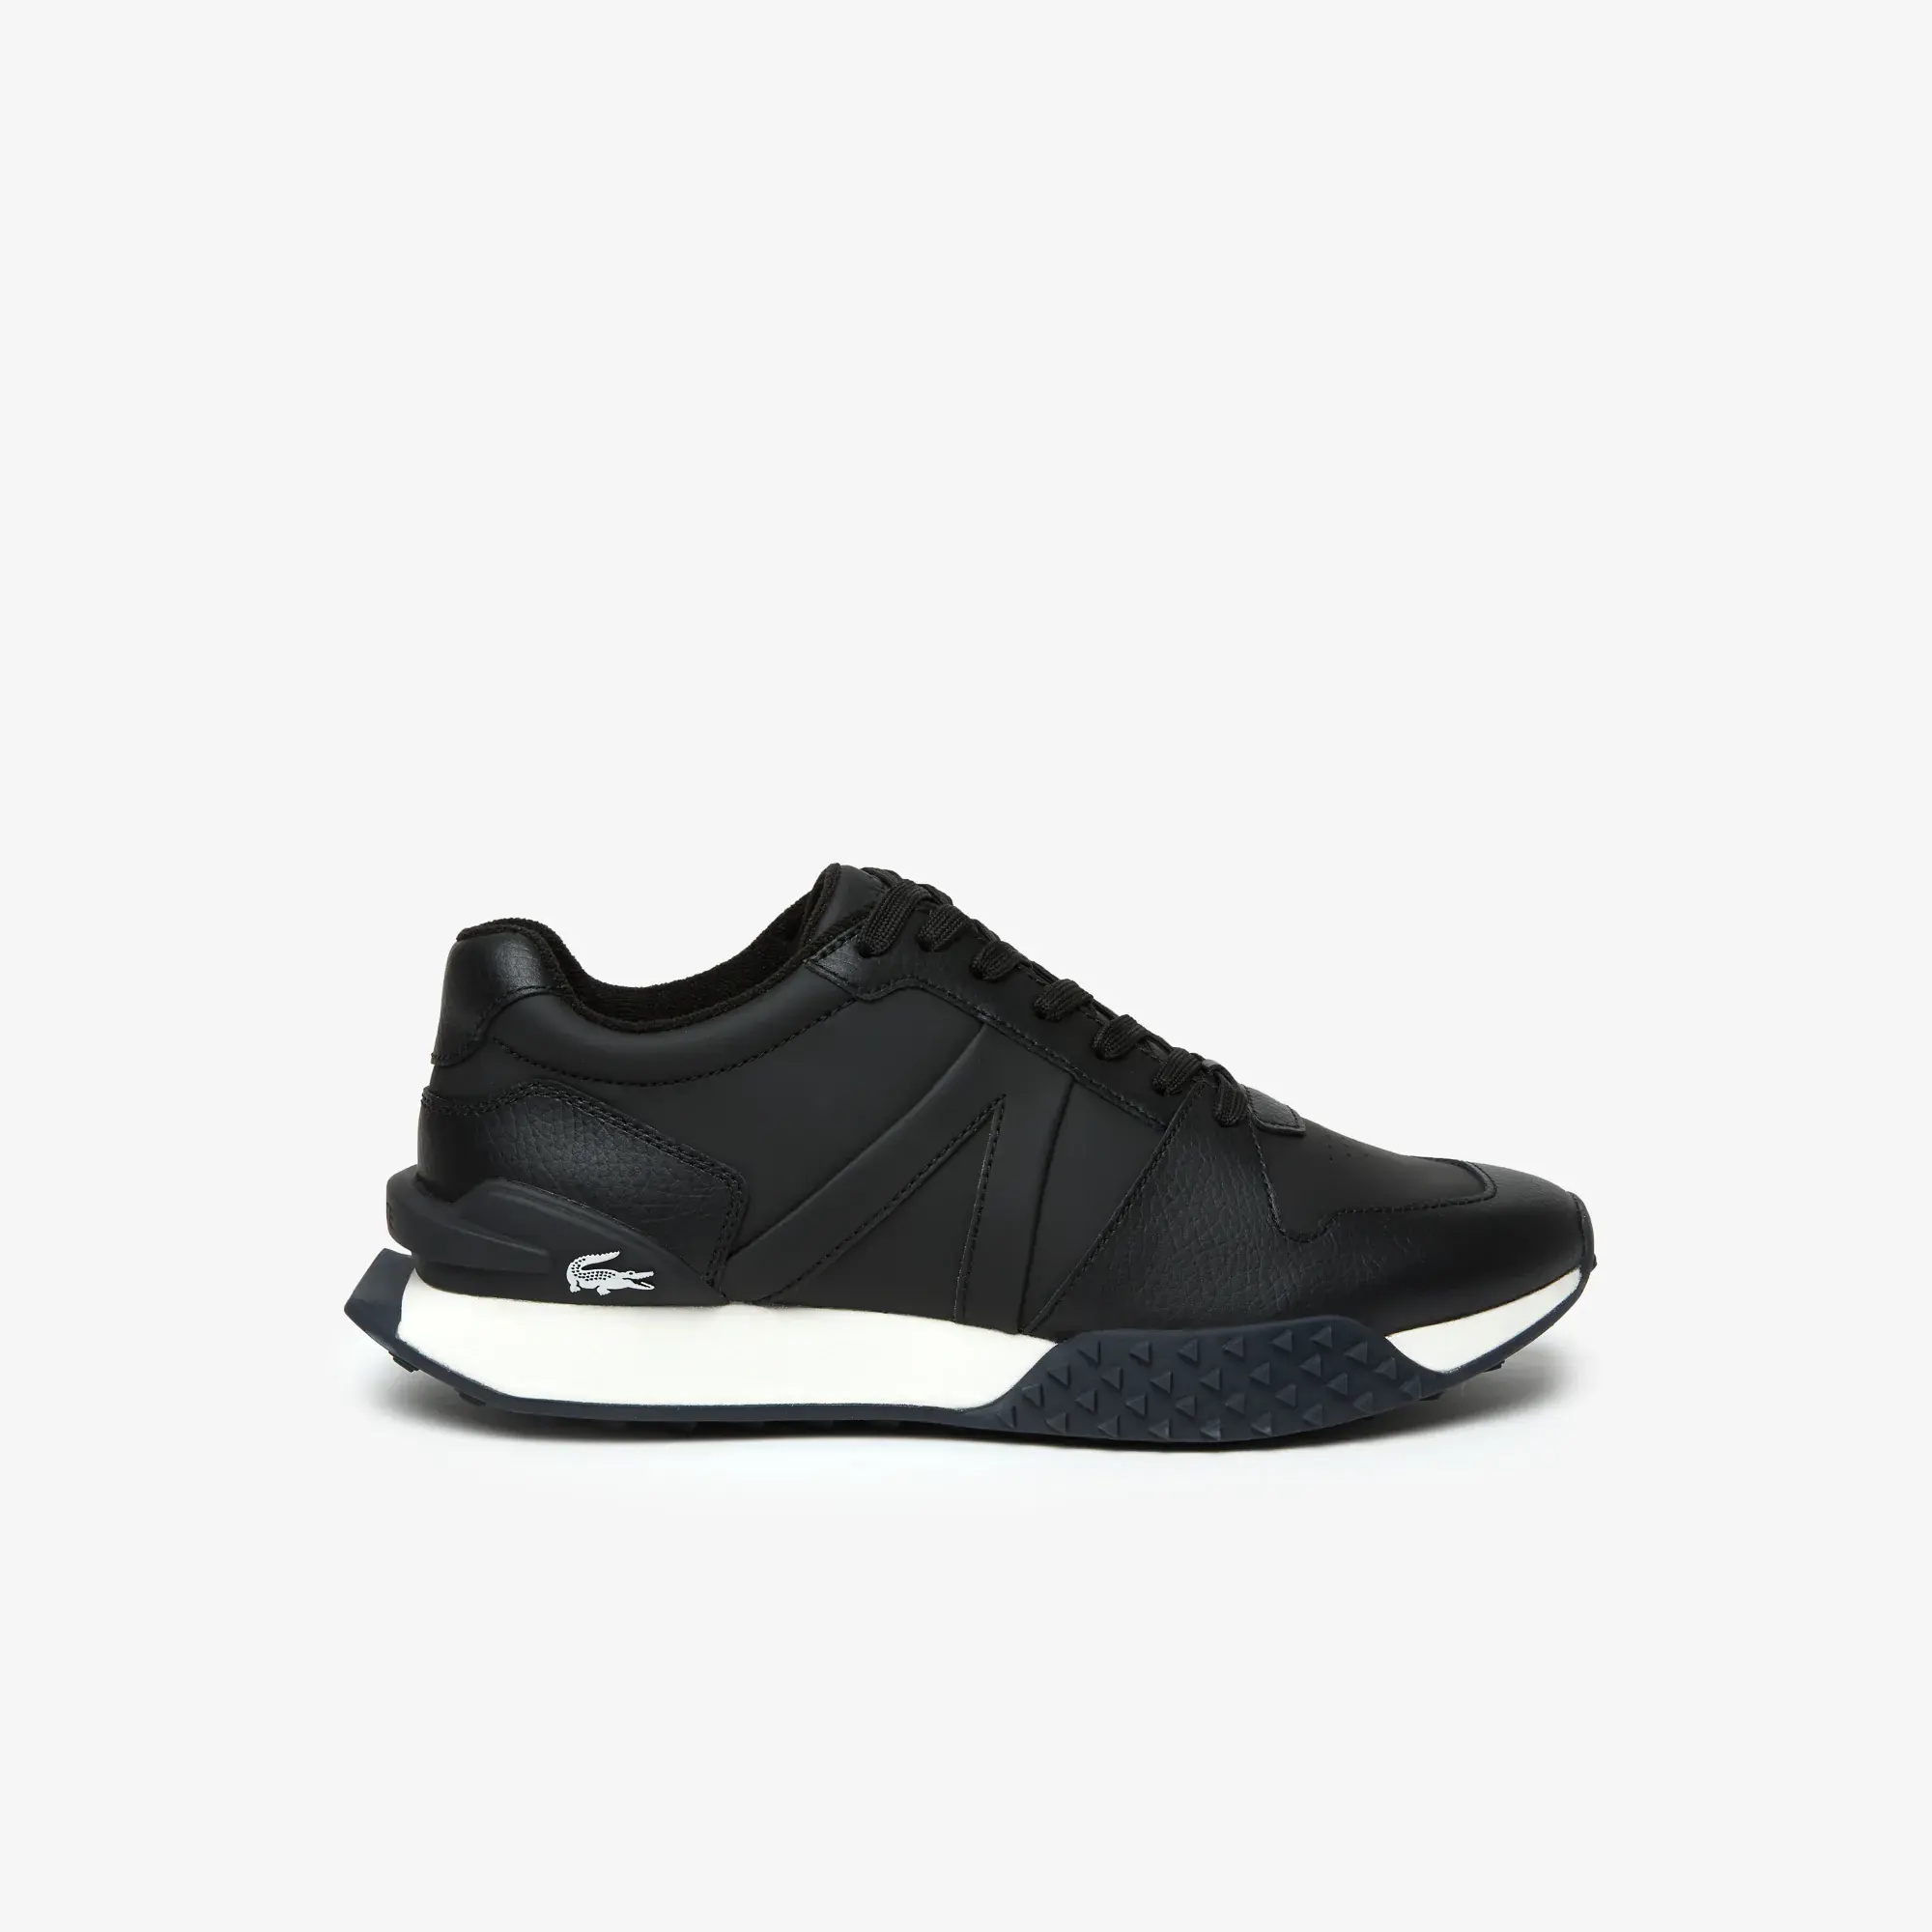 Lacoste Men's L-Spin Deluxe 2.0 Sneakers. 1